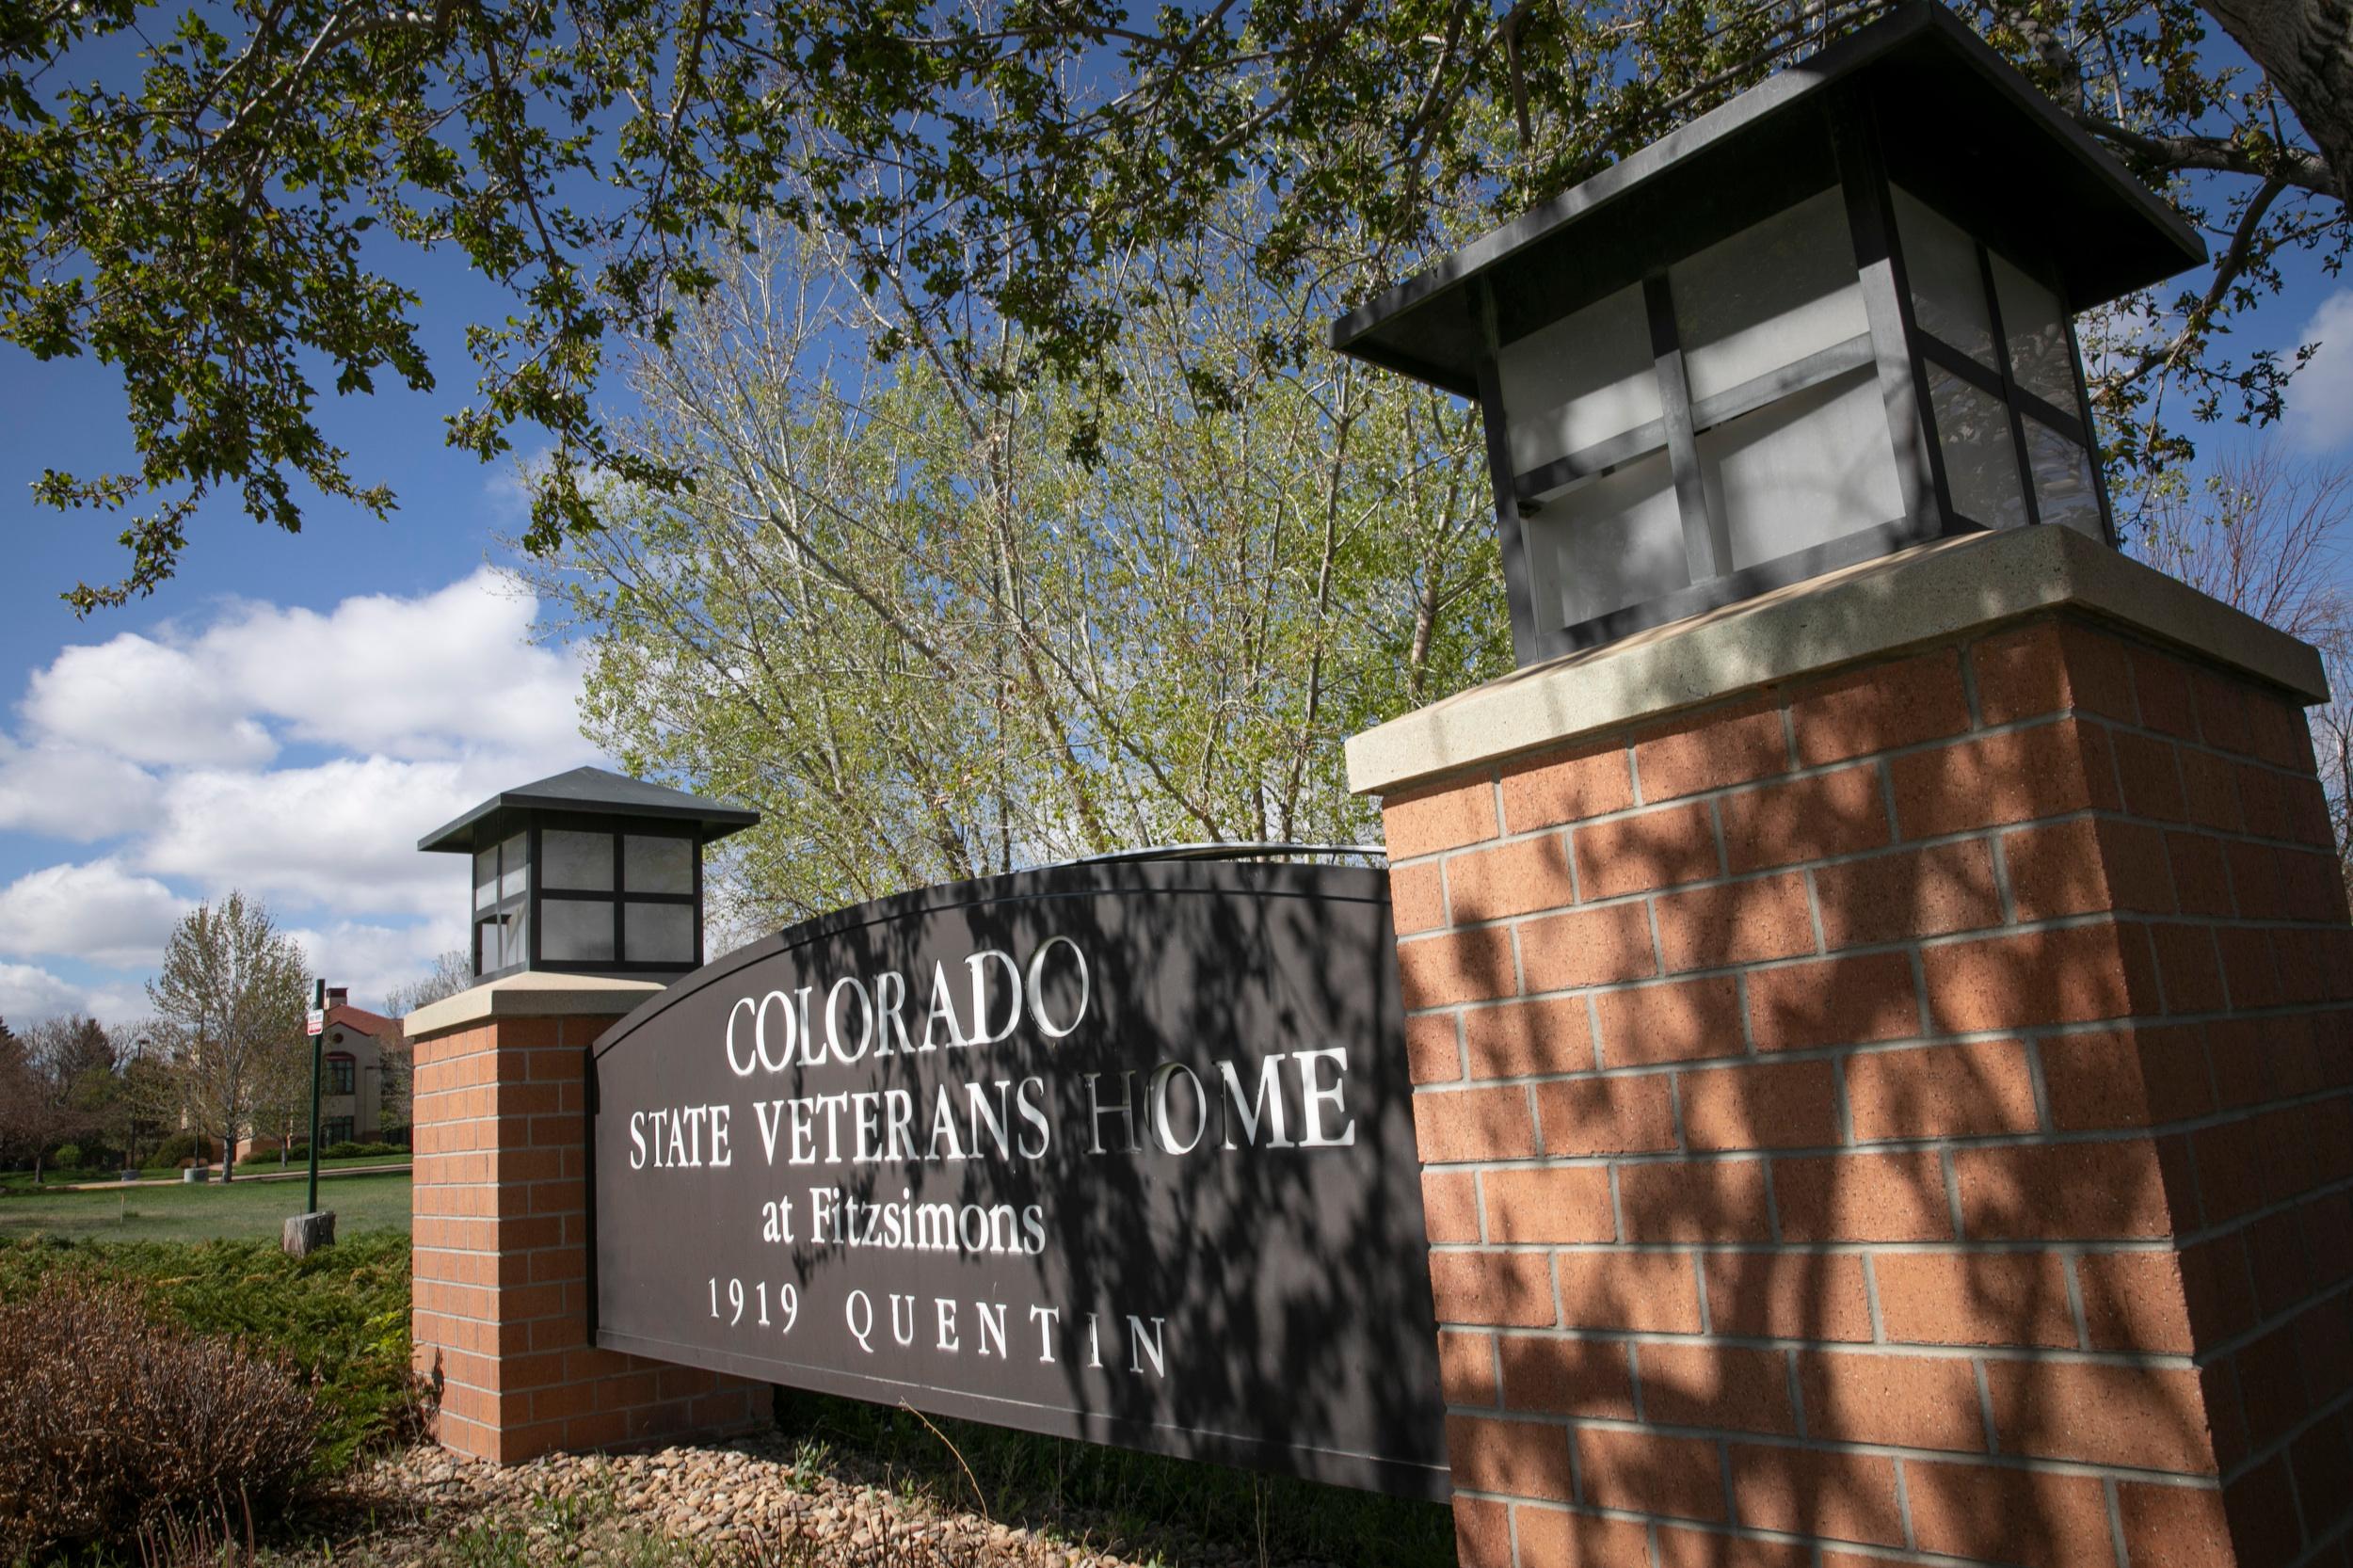 Colorado State Veterans Home at Fitzsimons in Aurora